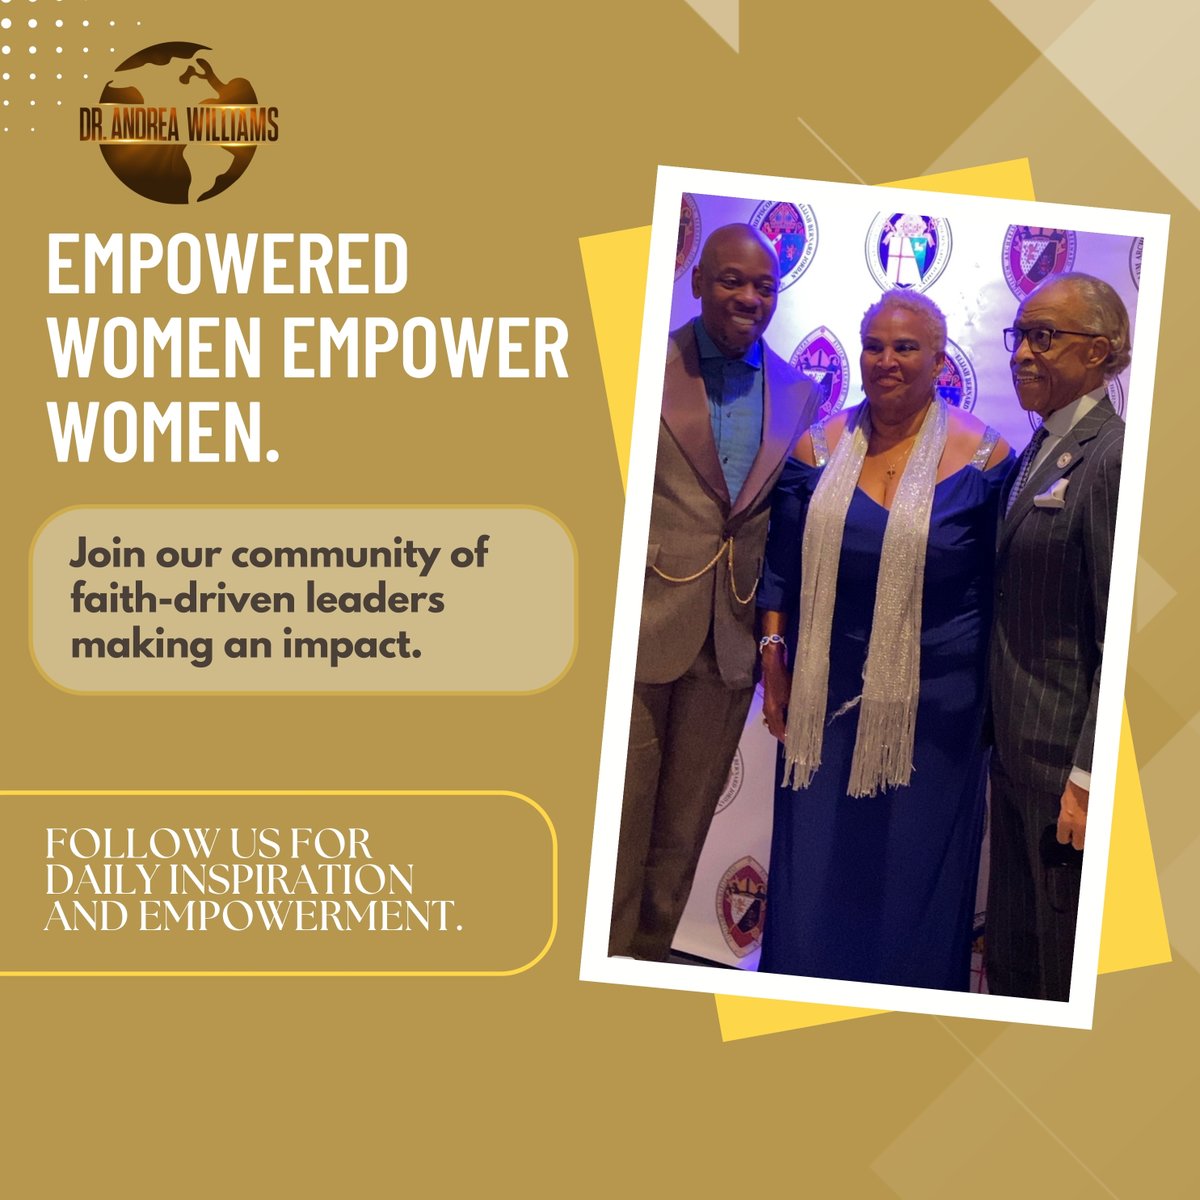 Empowered Women Empower Women 👭 Join our community of faith-driven leaders making an impact. Follow us for daily inspiration and empowerment.
.
.
.
.
.
.
.
#andreawilliamsministries #purposecalling #listentoyourheart #divinepurpose #spiritualcall #findyourwhy #purposefulliving